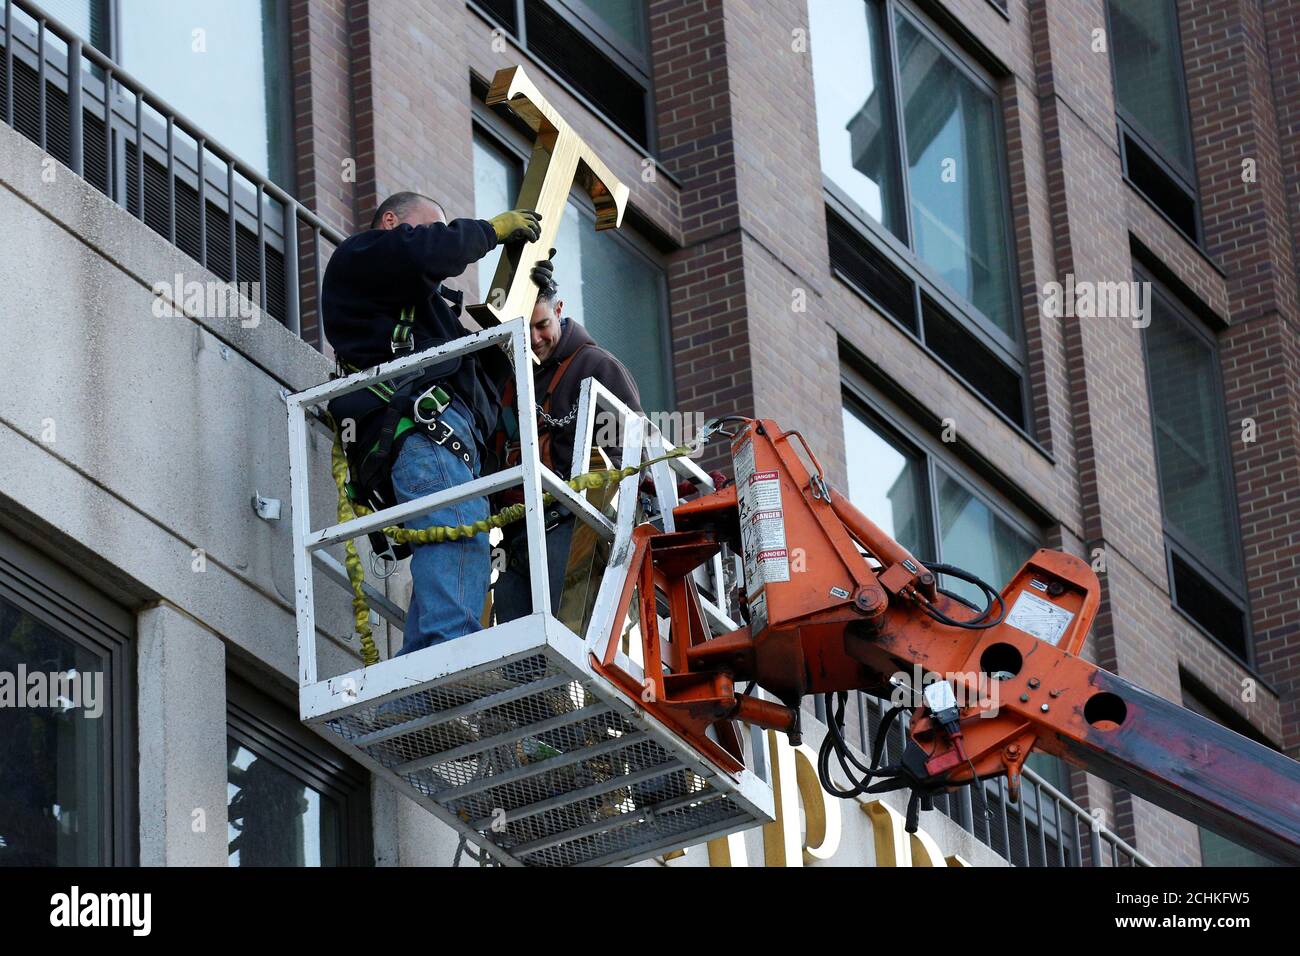 Workers remove signage on the Trump Place apartment buildings on Manhattan's Upper West Side in New York City, U.S., November 16, 2016.  REUTERS/Brendan McDermid Stock Photo